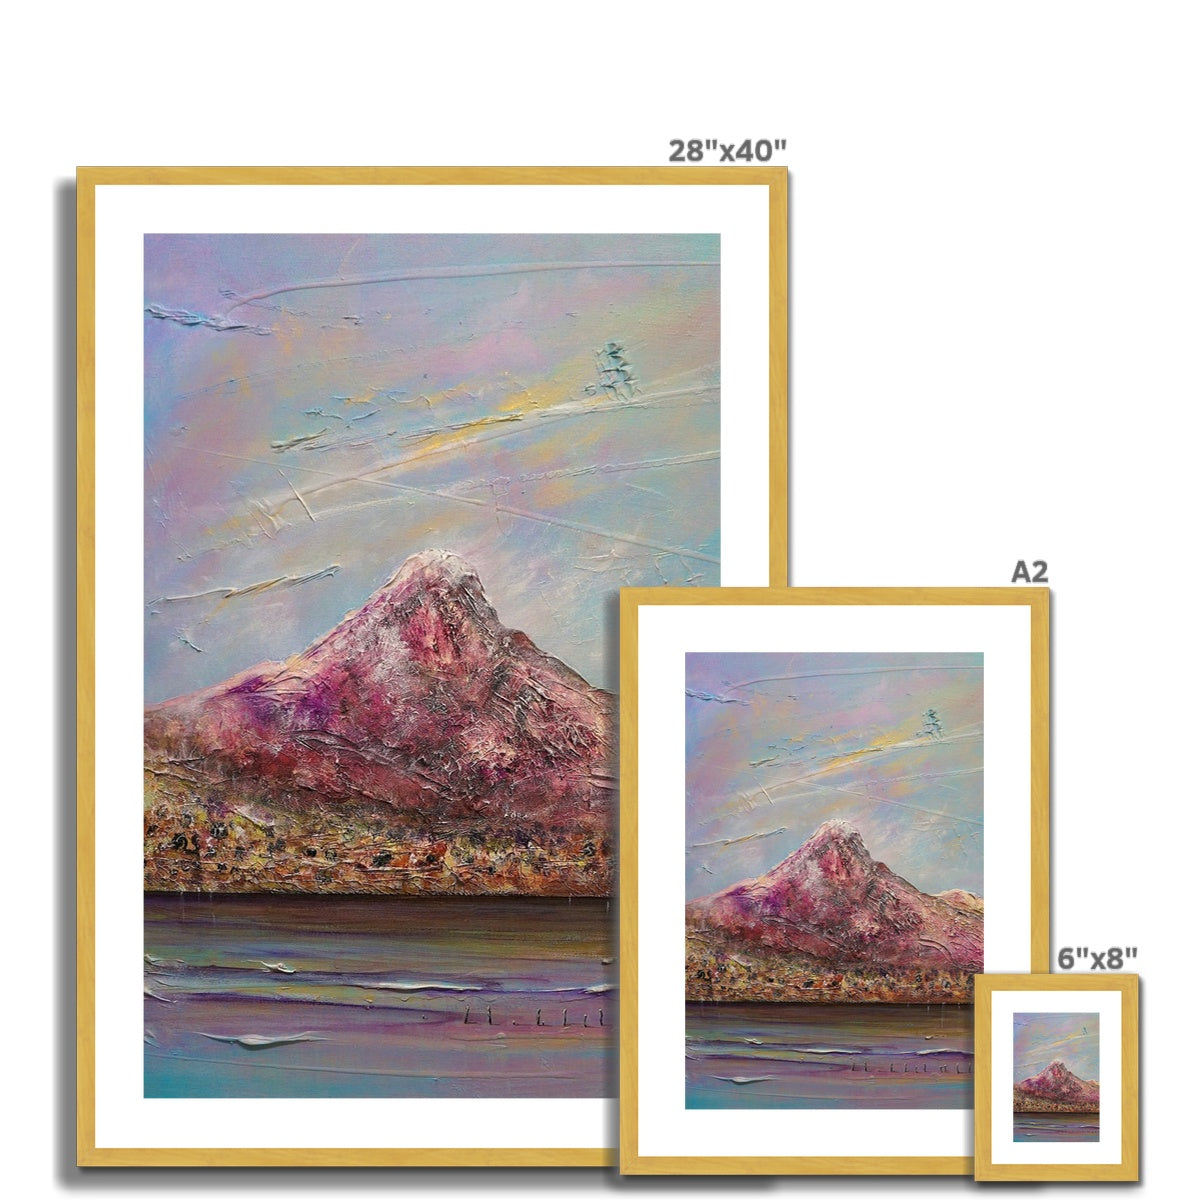 Ben Lomond Painting | Antique Framed & Mounted Prints From Scotland-Antique Framed & Mounted Prints-Scottish Lochs & Mountains Art Gallery-Paintings, Prints, Homeware, Art Gifts From Scotland By Scottish Artist Kevin Hunter